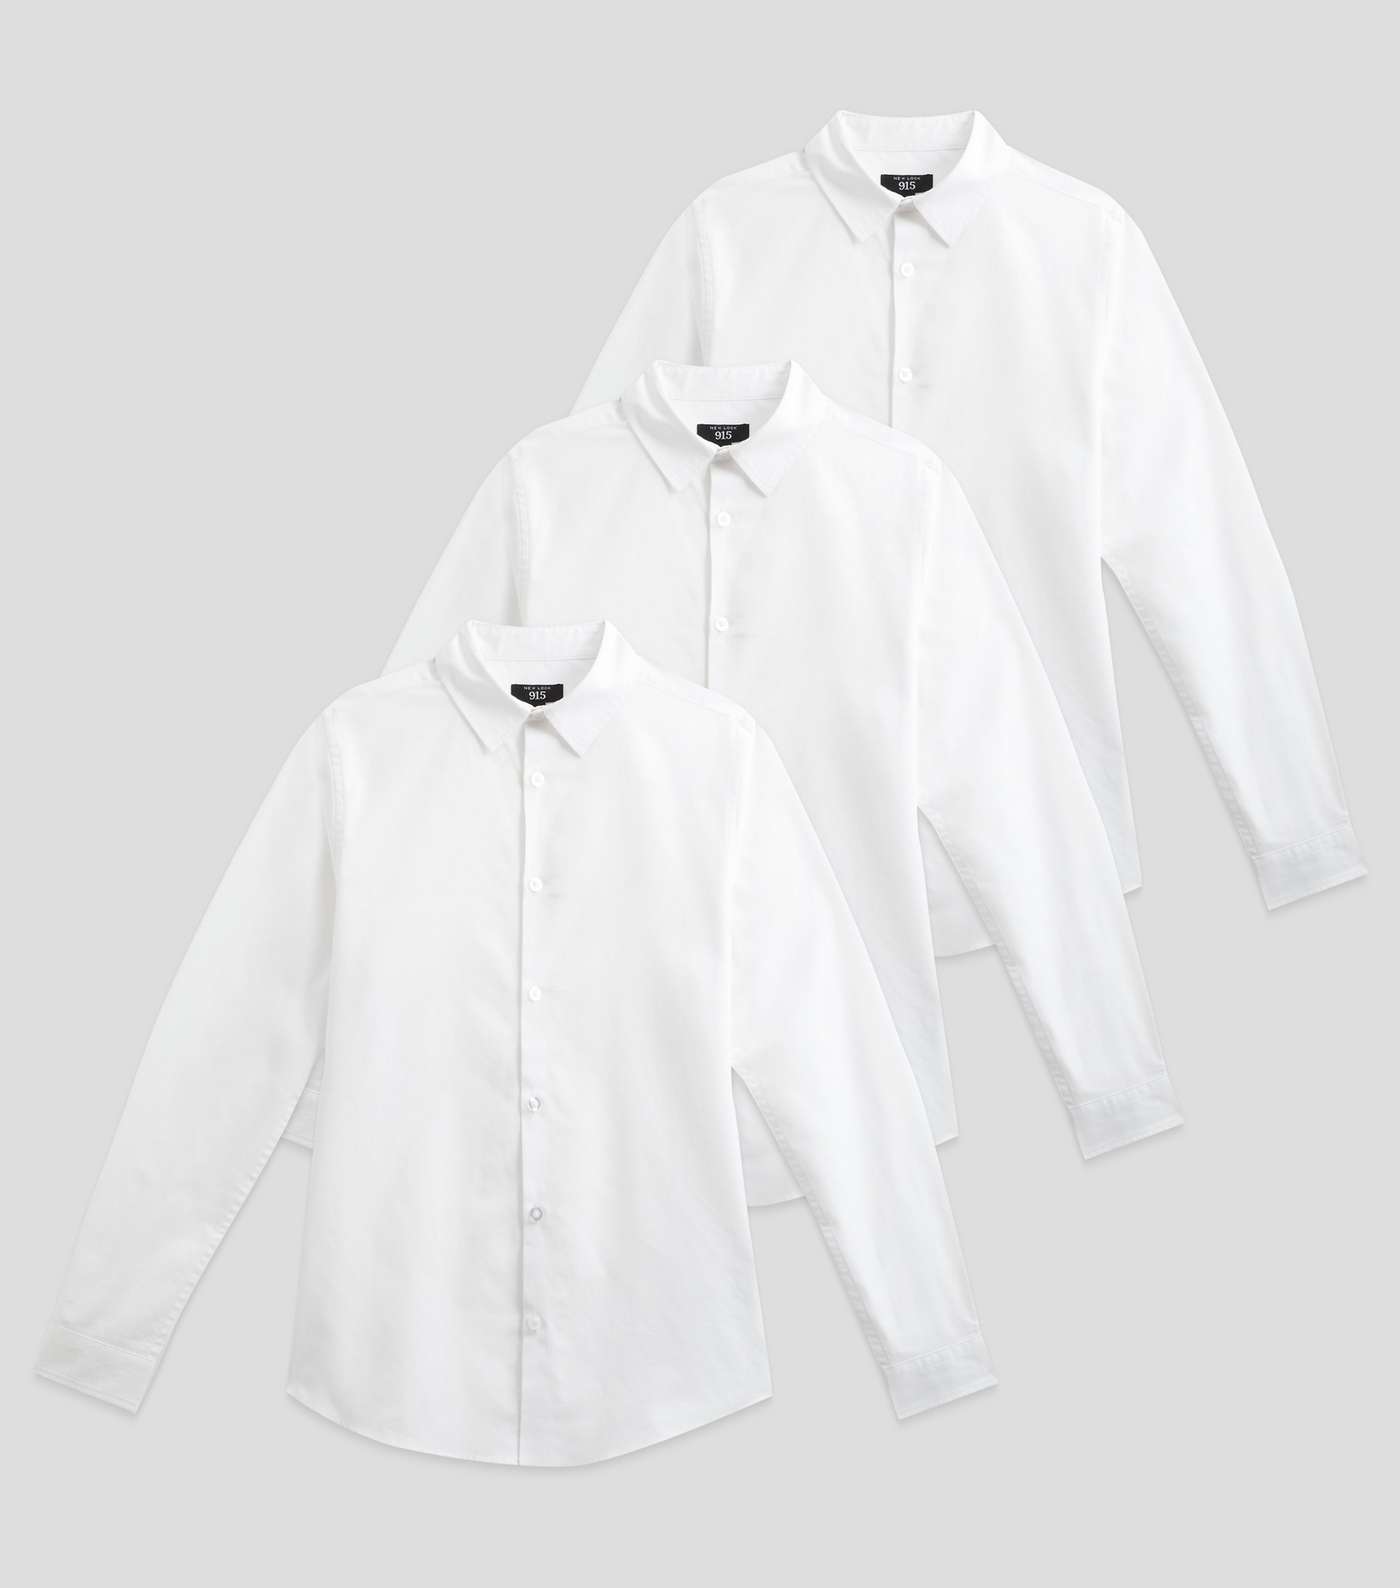 Boys 3 Pack White Long Sleeve Easy Care School Shirts Image 9